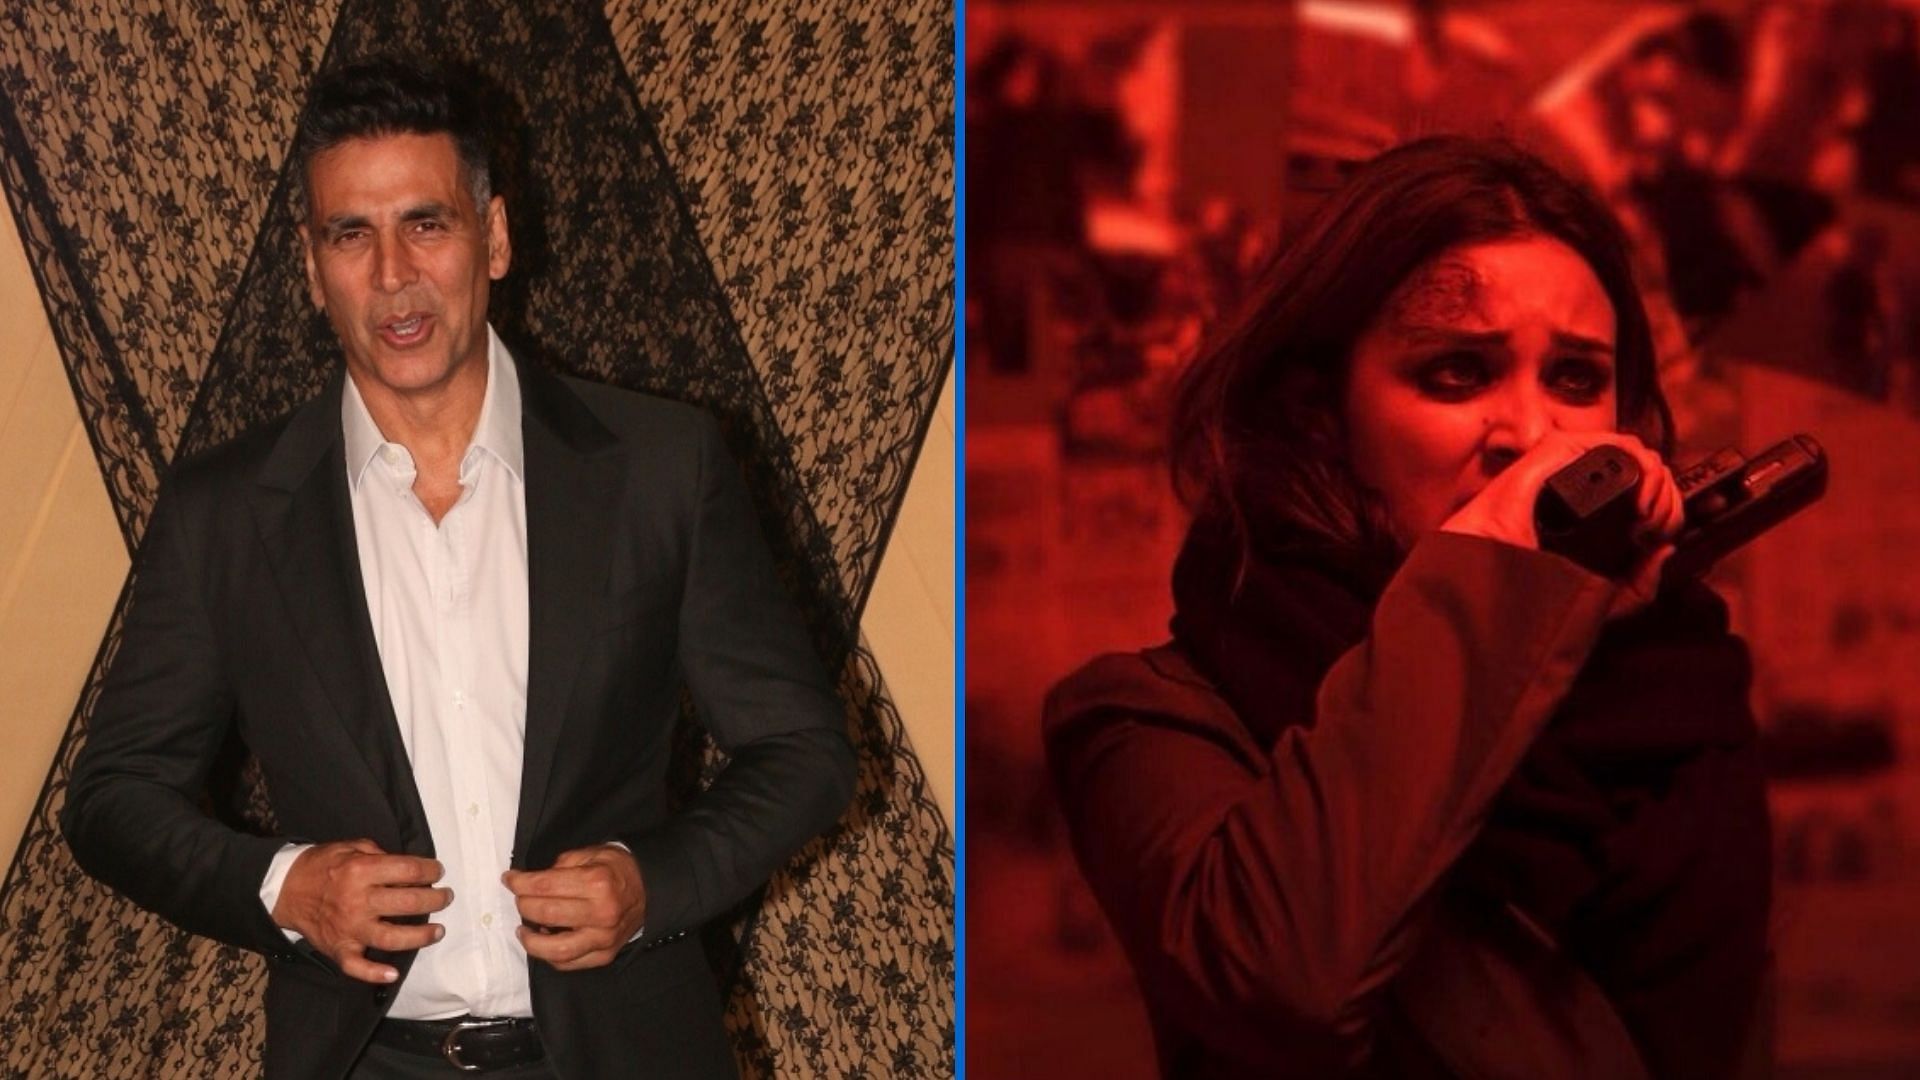 Akshay Kumar, celebs have condemned the murder of a young woman in Hyderabad; Parineeti in a still from <i>The Girl on the Train </i>remake.